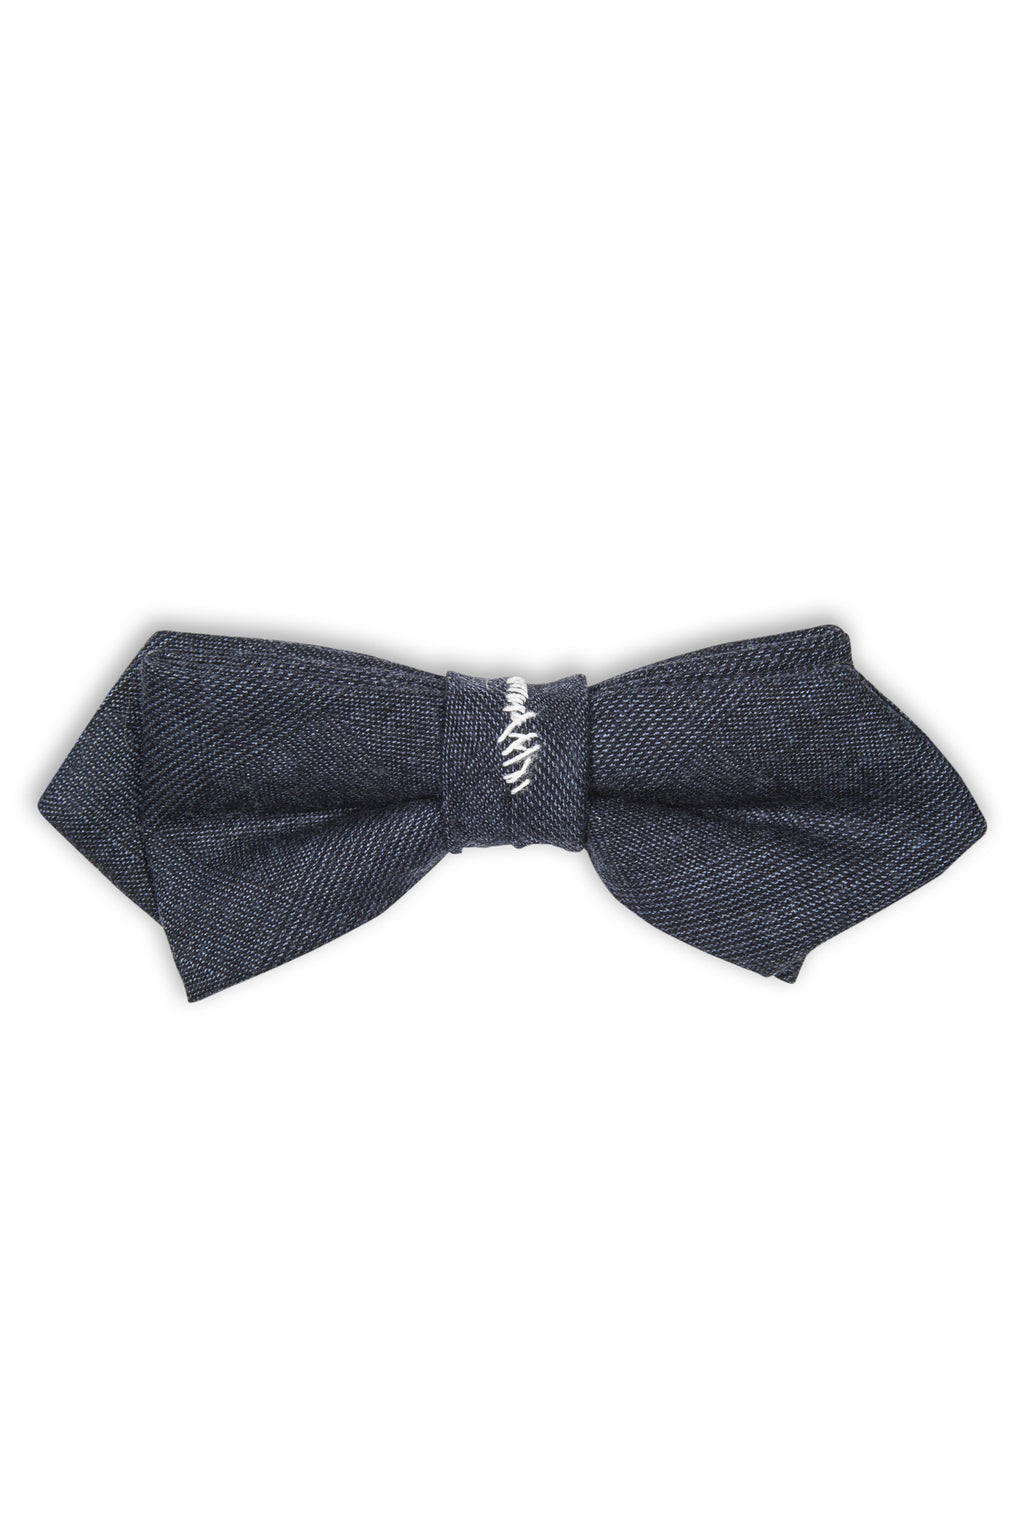 Noeud papillon avec fil blanc -Handmade blue bow tie with white threads 